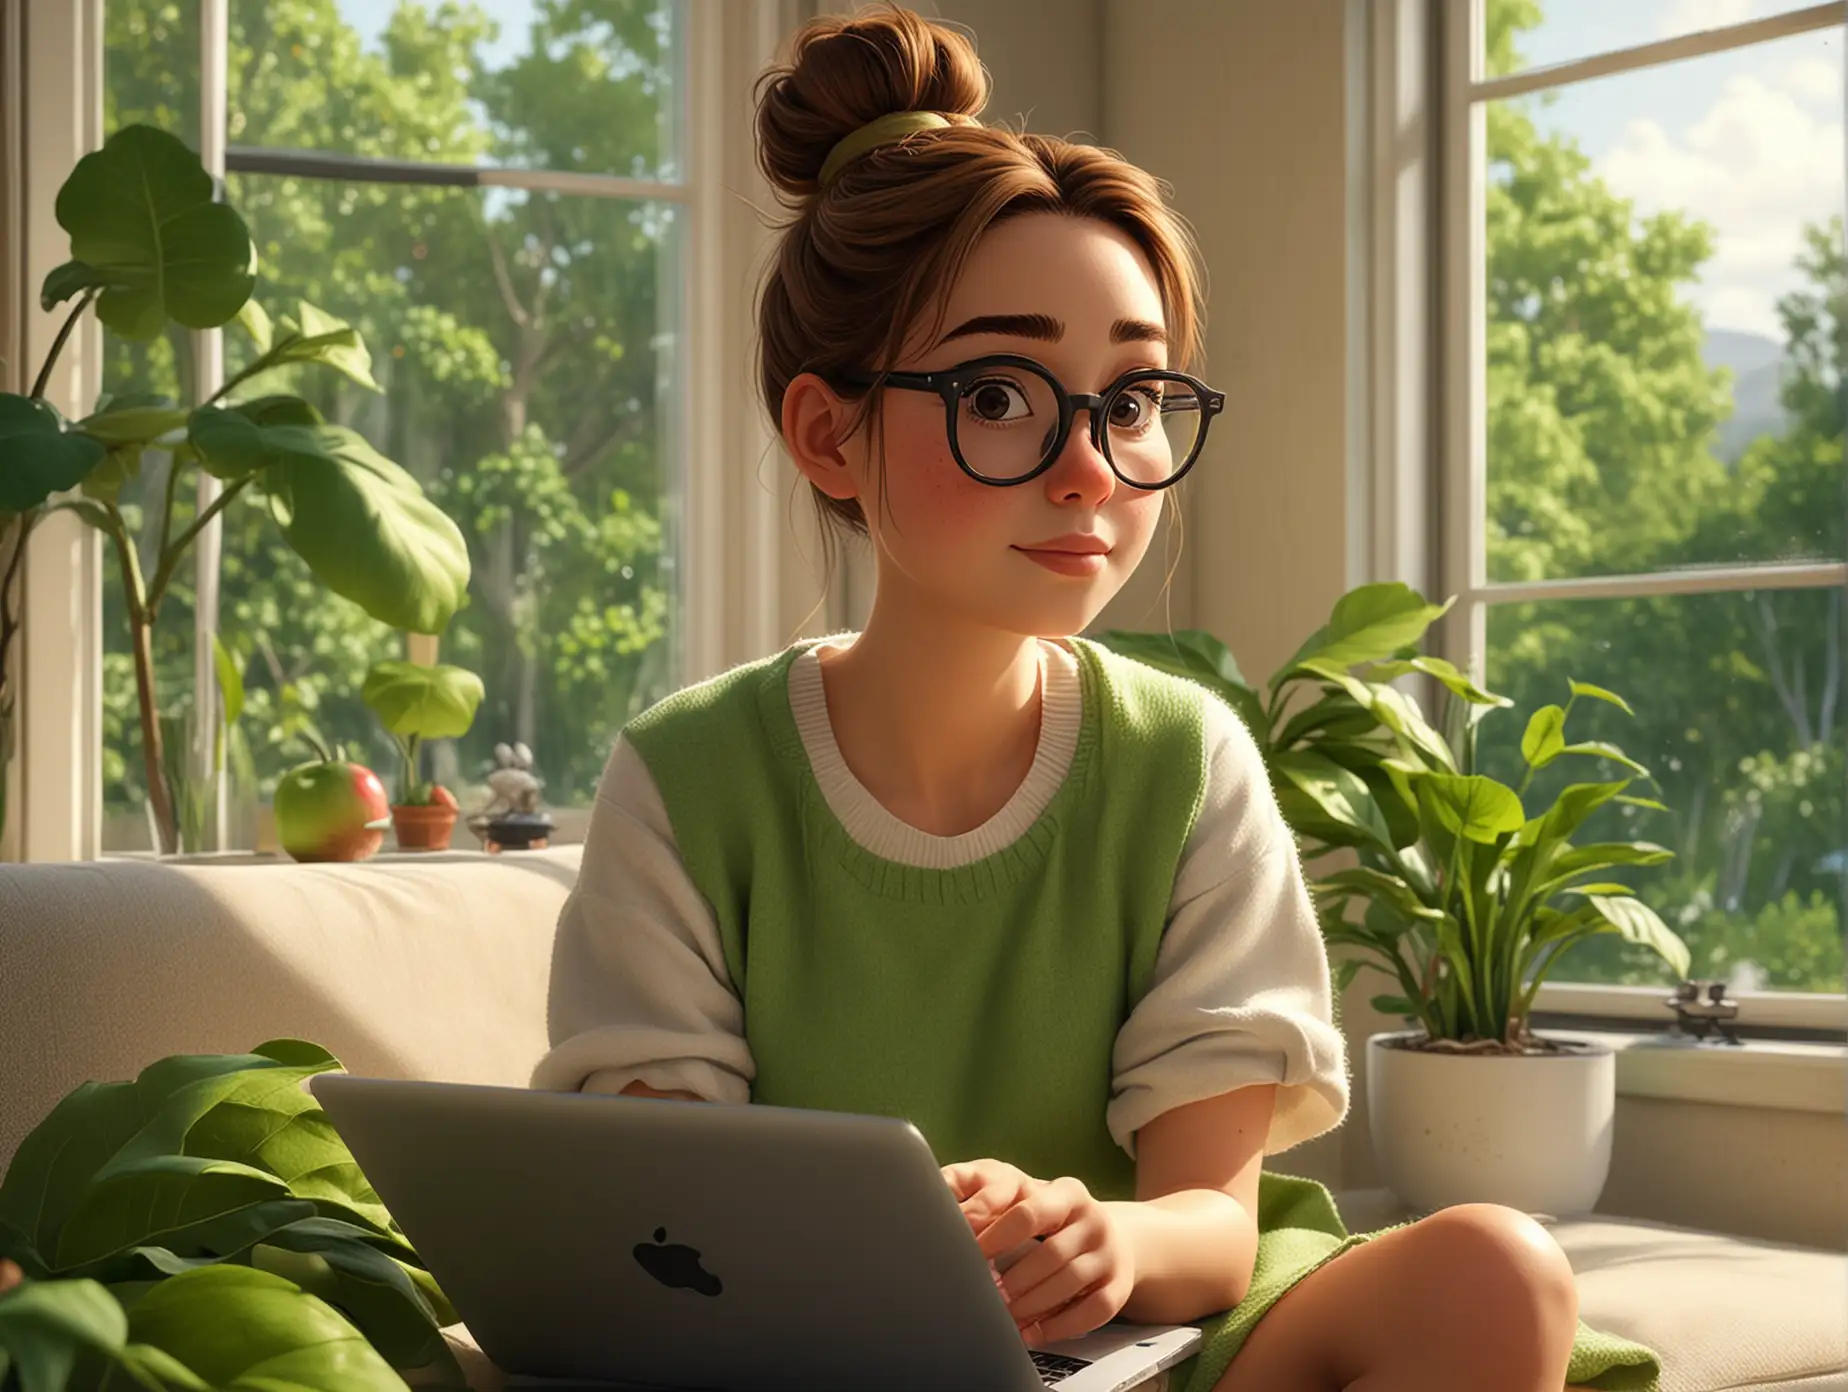 Pixar style, female, with a bun hairstyle, wearing glasses, comfortable to wear, working from home. Sitting on the sofa, holding the Apple computer, behind you is a large french window, and outside the window is a green landscape. There are green plants at home.